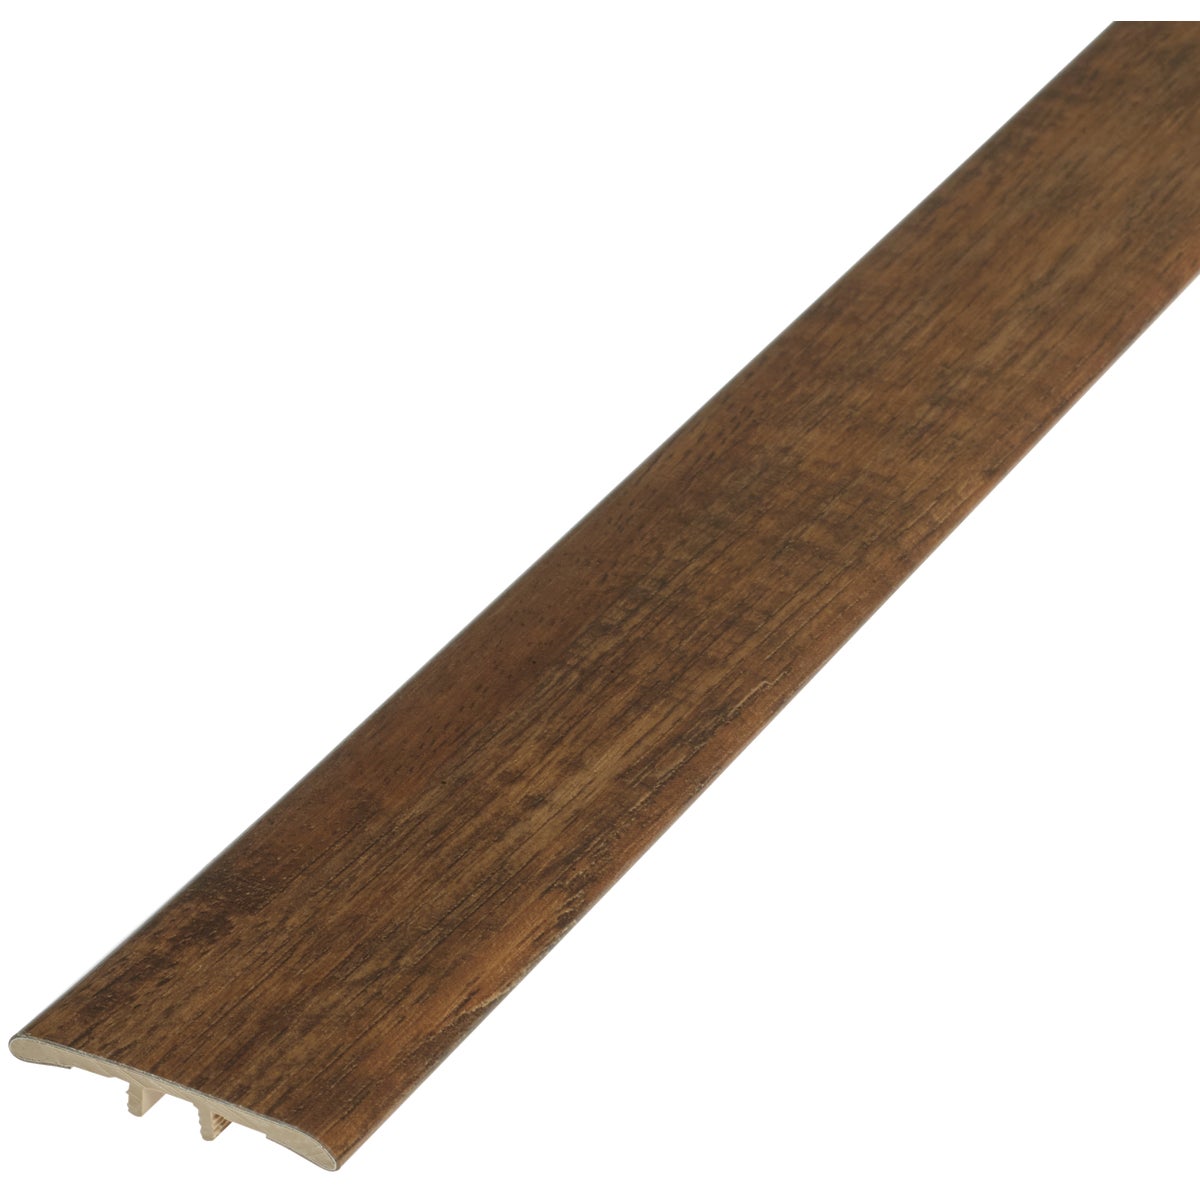 Shaw Tenacious HD Bamboo 1-3/4 In. x 94 In. T Mold Floor Transition